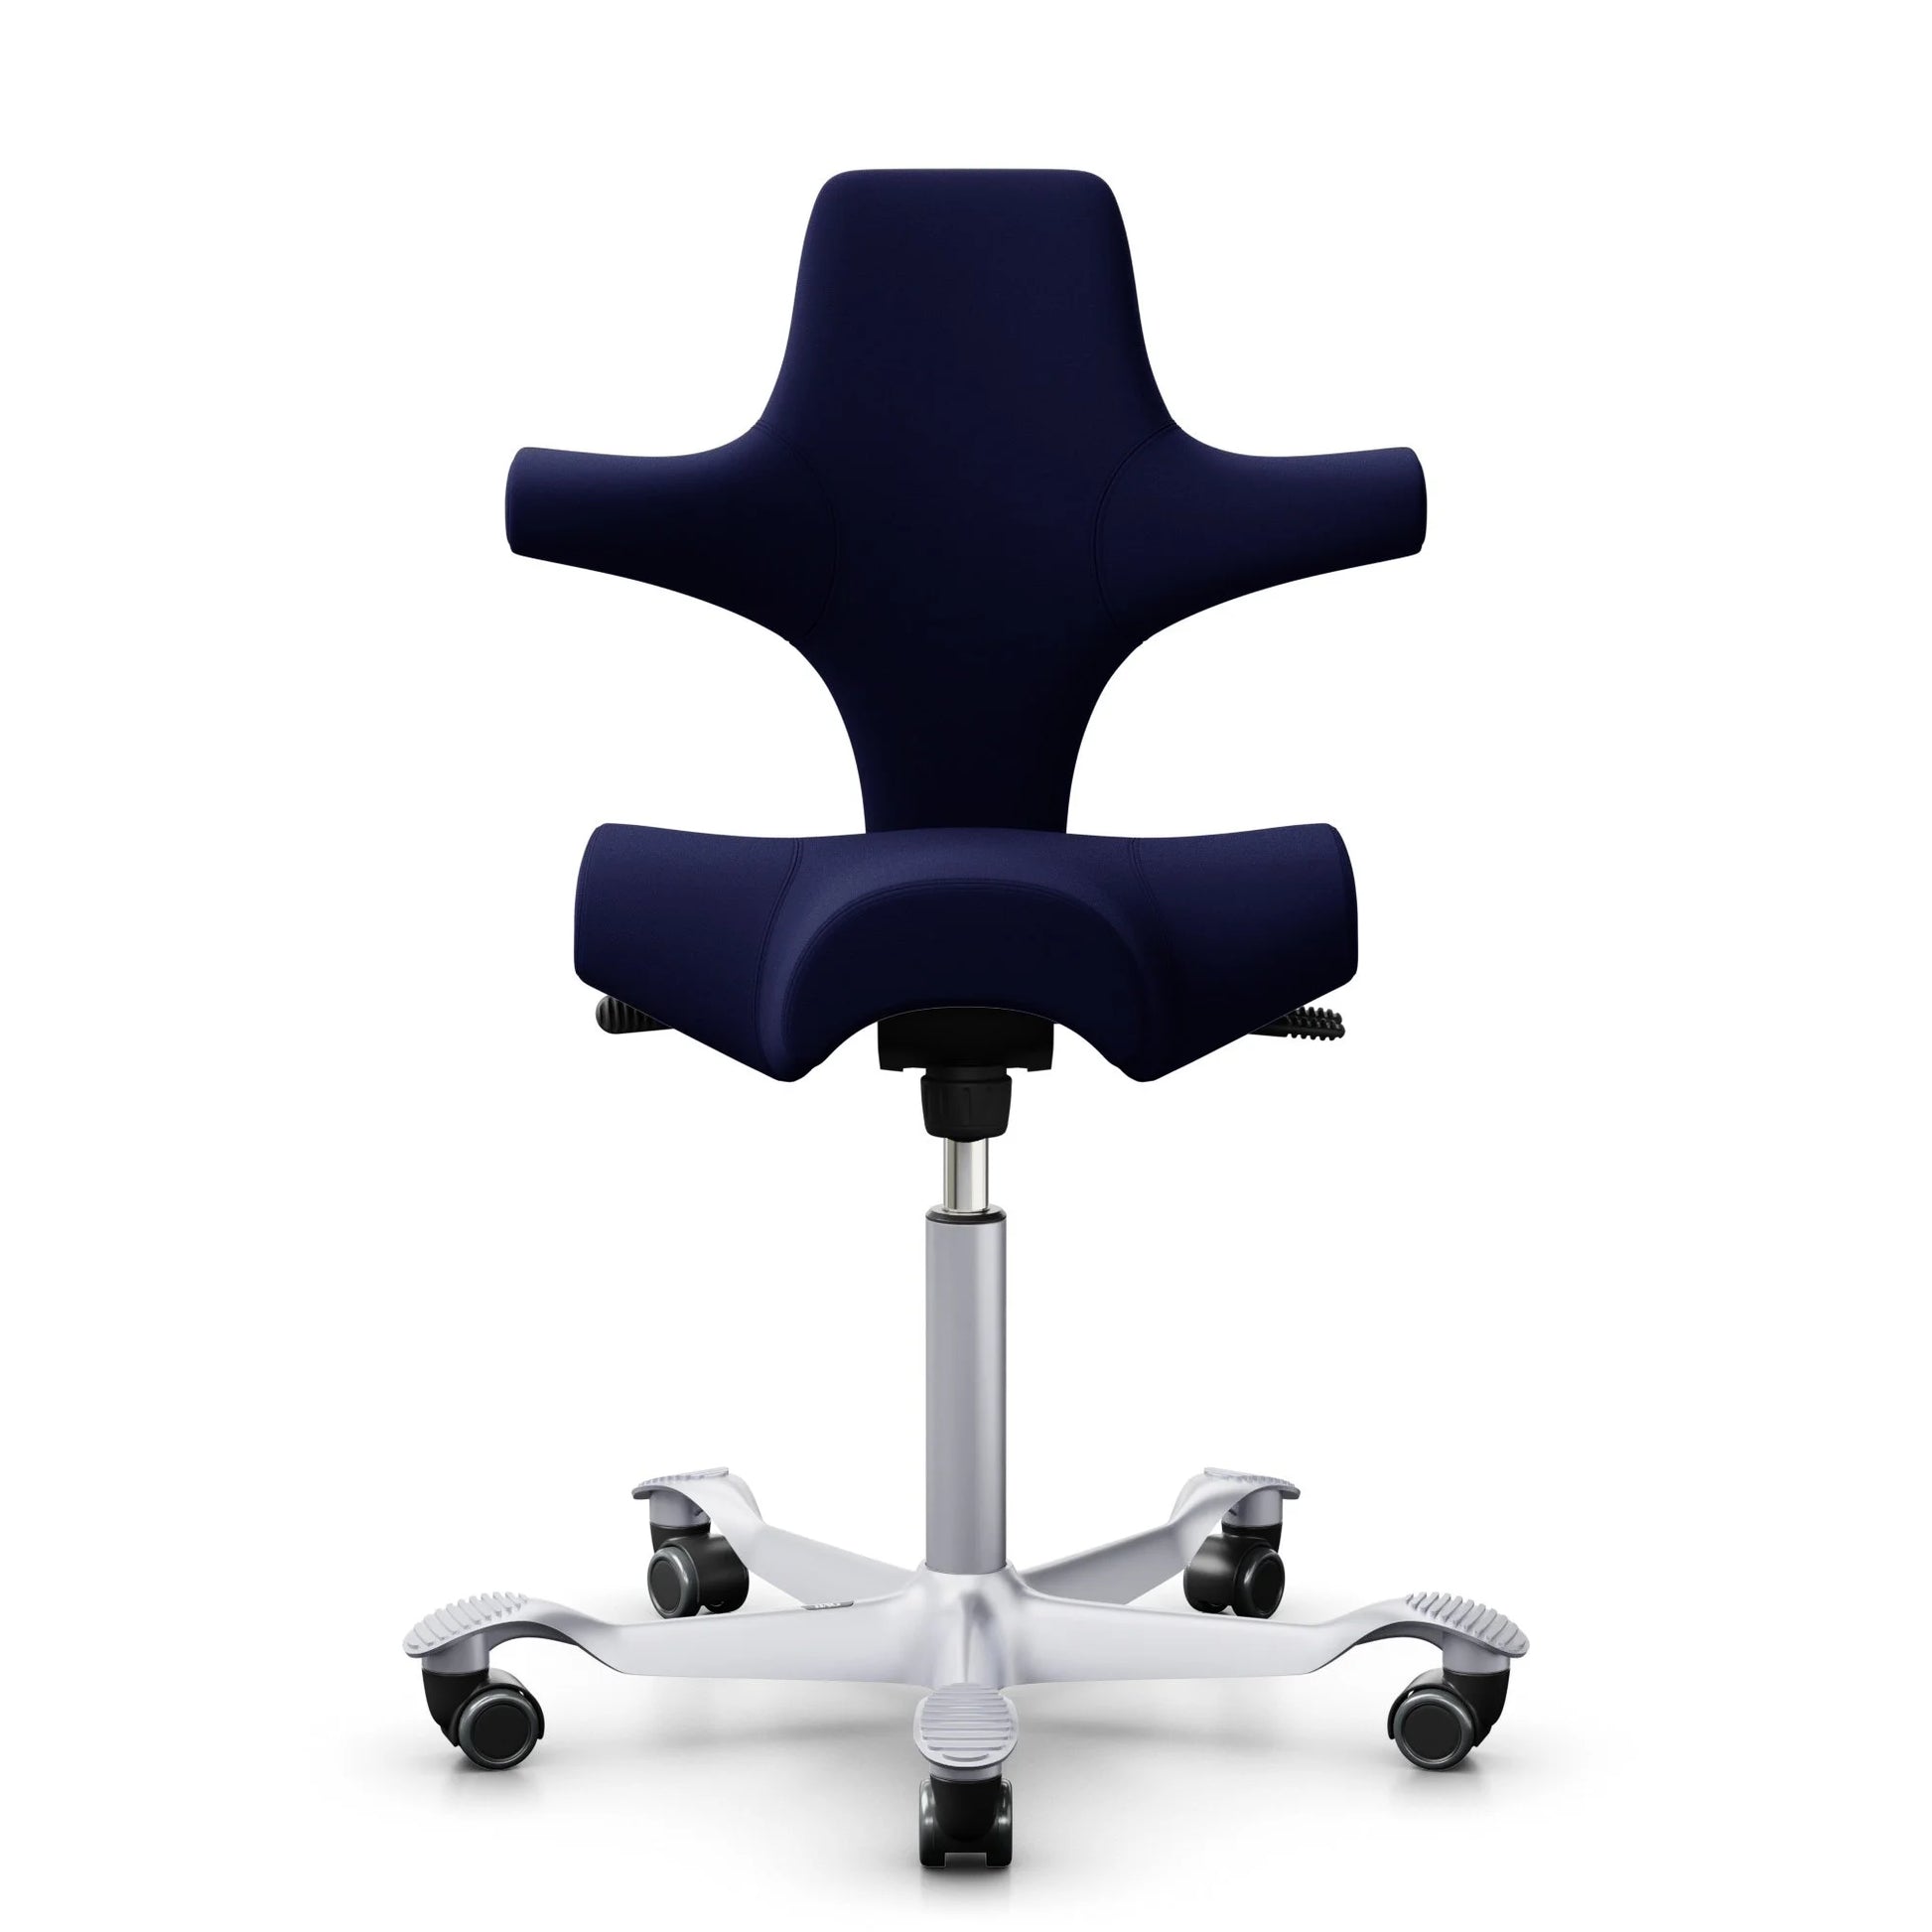 Horse Saddle Office Chair, Best Ergonomic Saddle Chairs